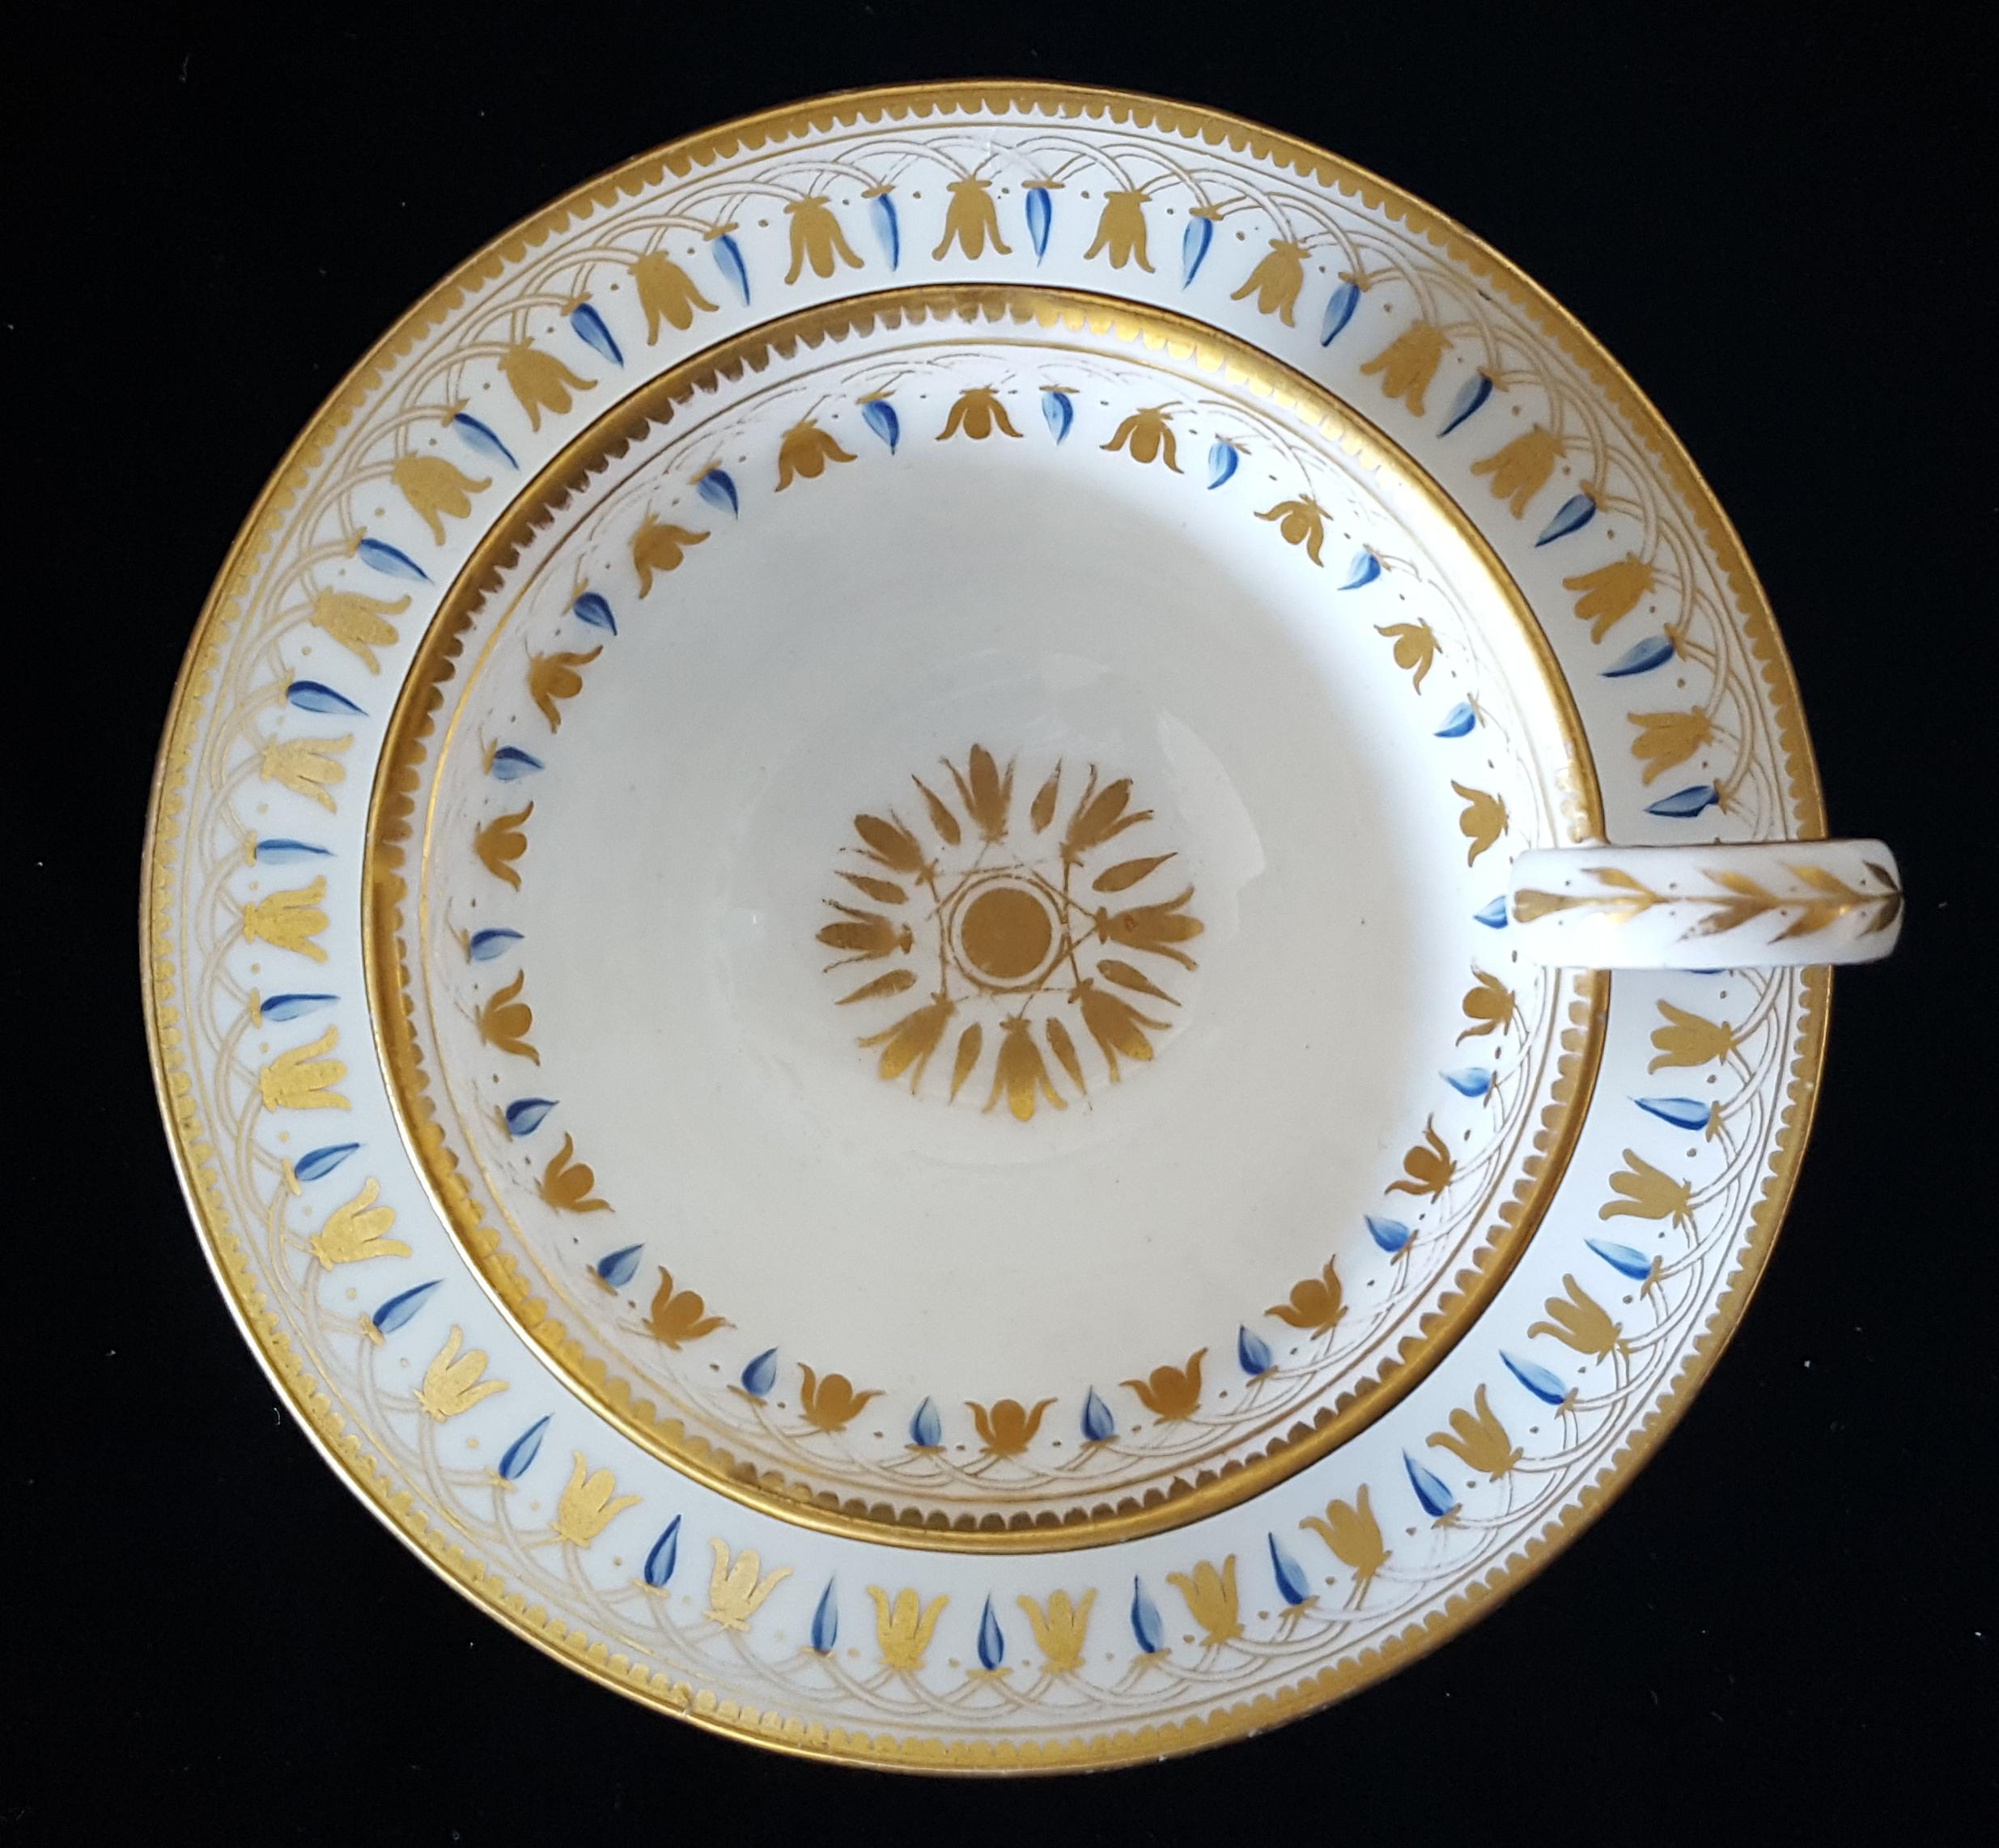 A particularly pleasing and restrained form of decoration for this period, which allows the beauty of the porcelain to be clearly seen.

Nantgarw porcelain is particularly fine, and was much prized by the London decorating workshops, where this